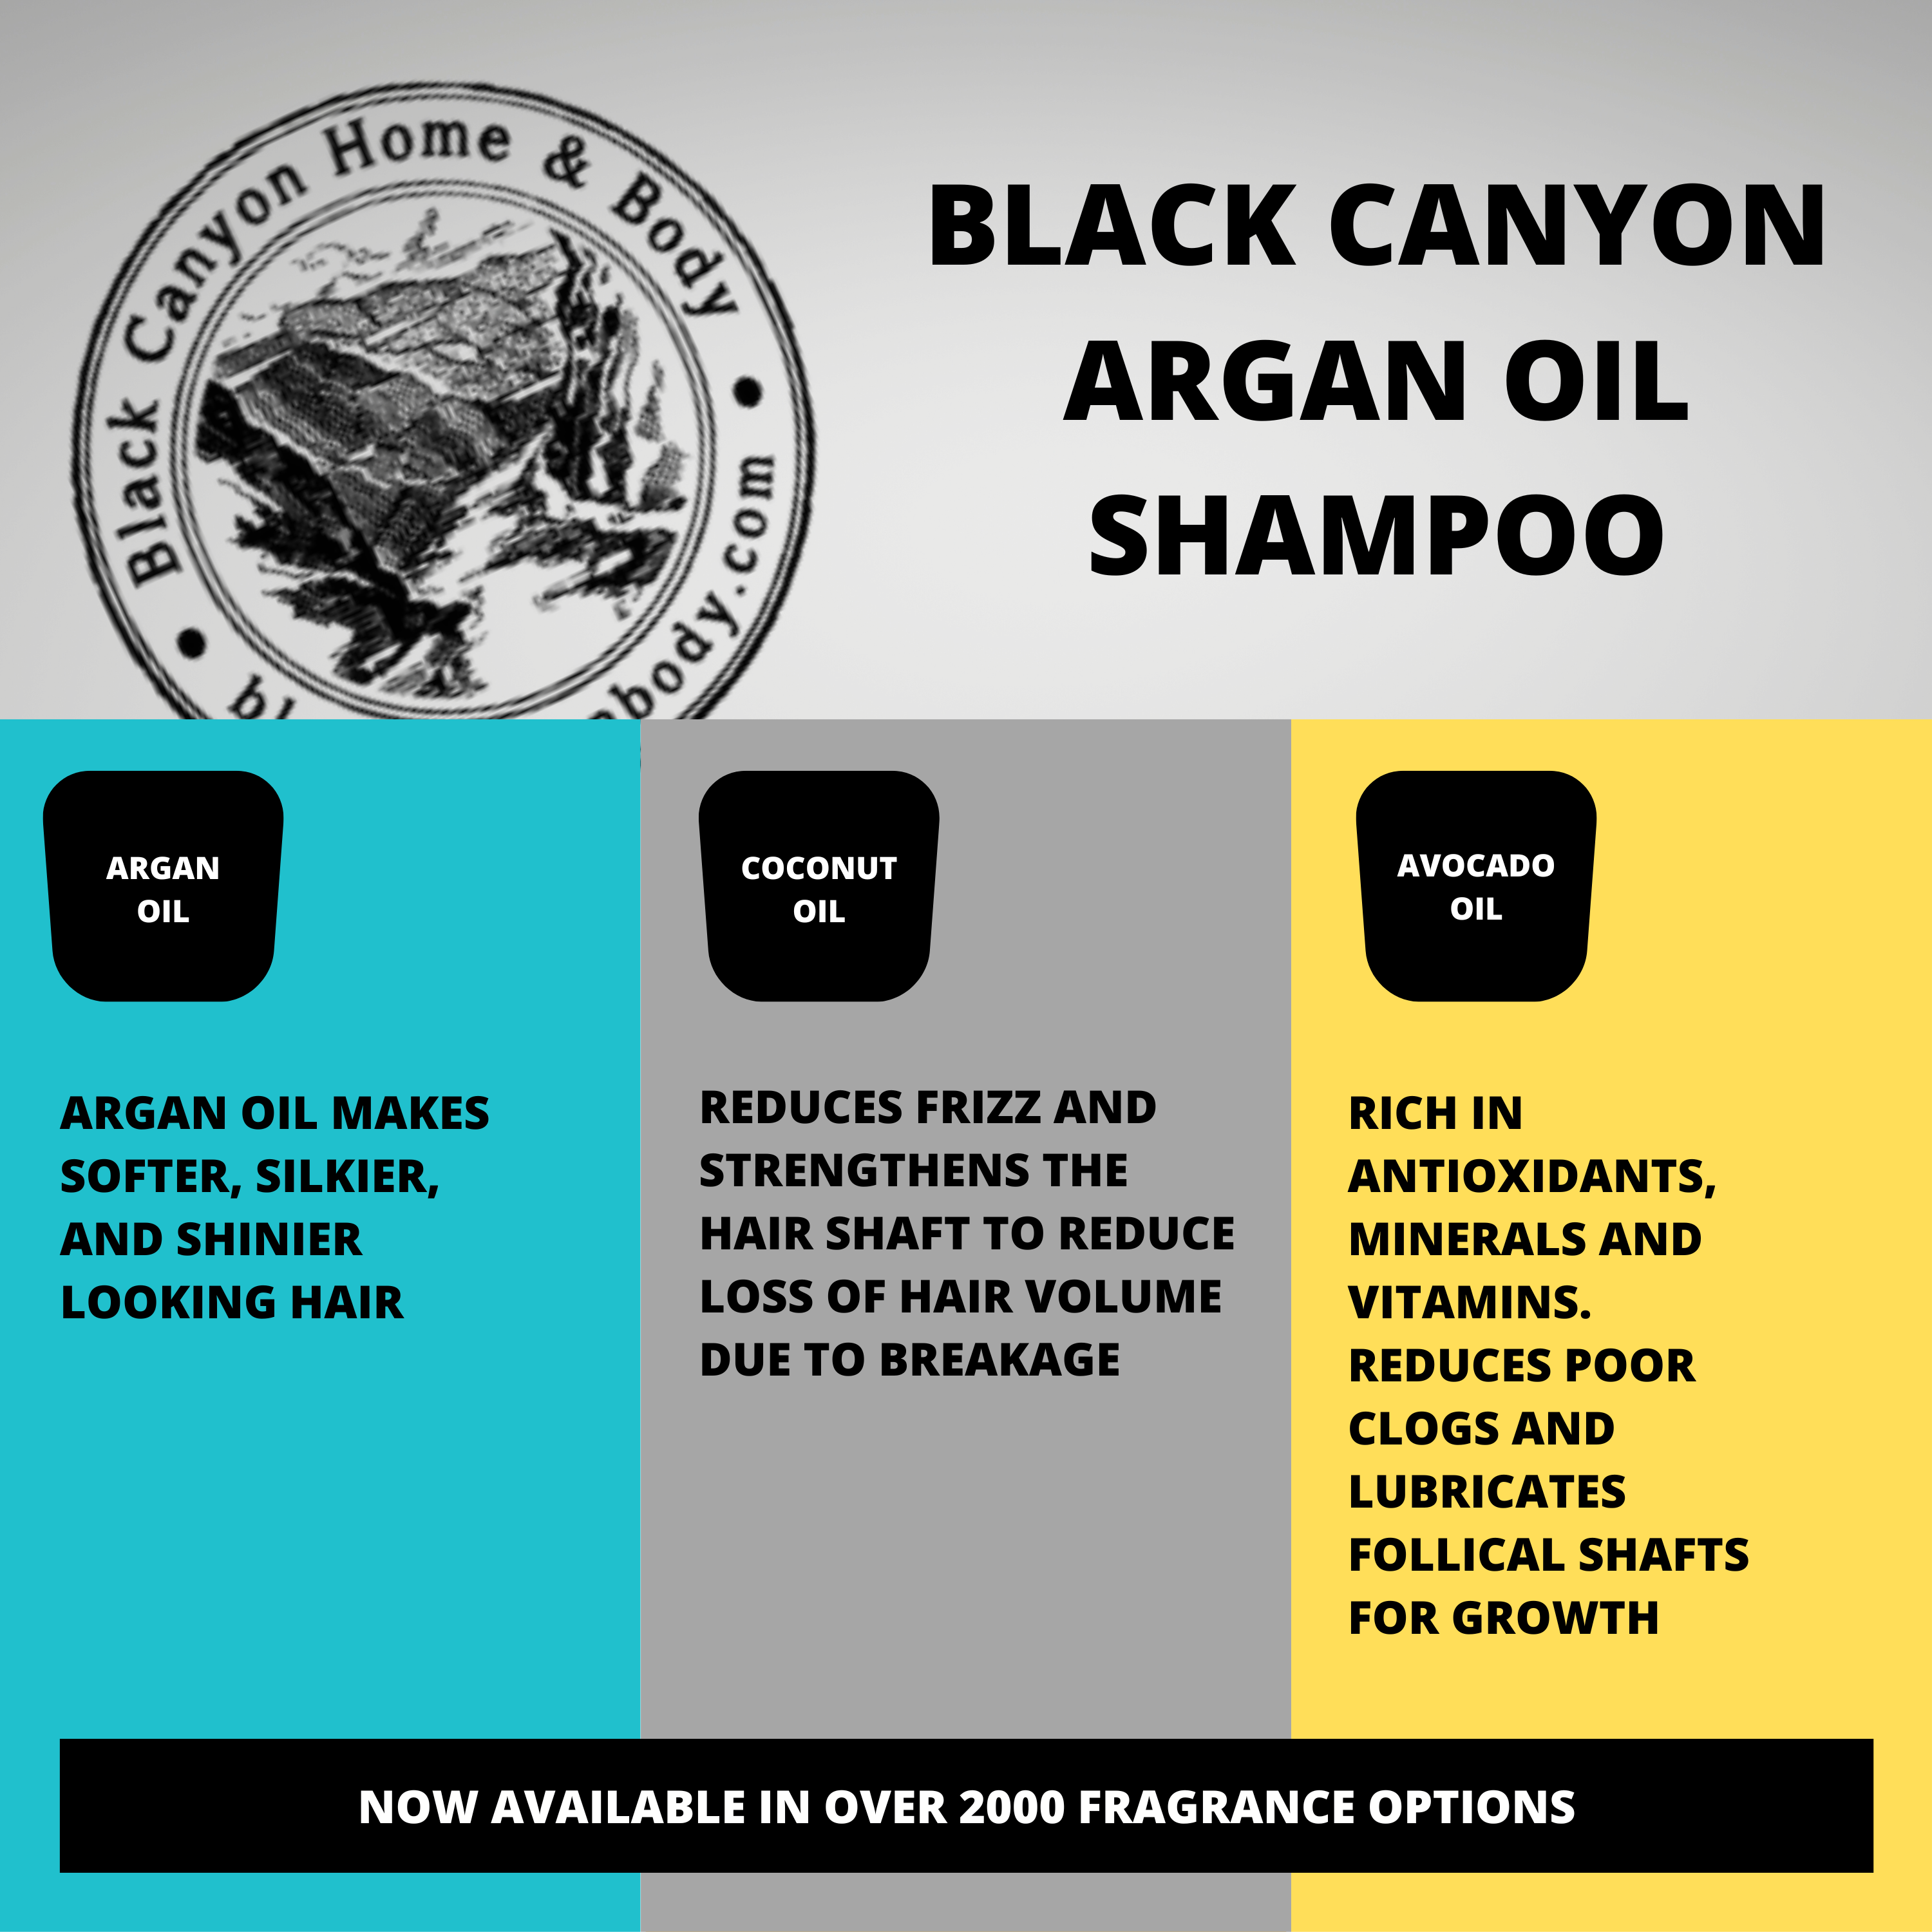 Black Canyon Christmas Candy Cane Scented Shampoo with Argan Oil